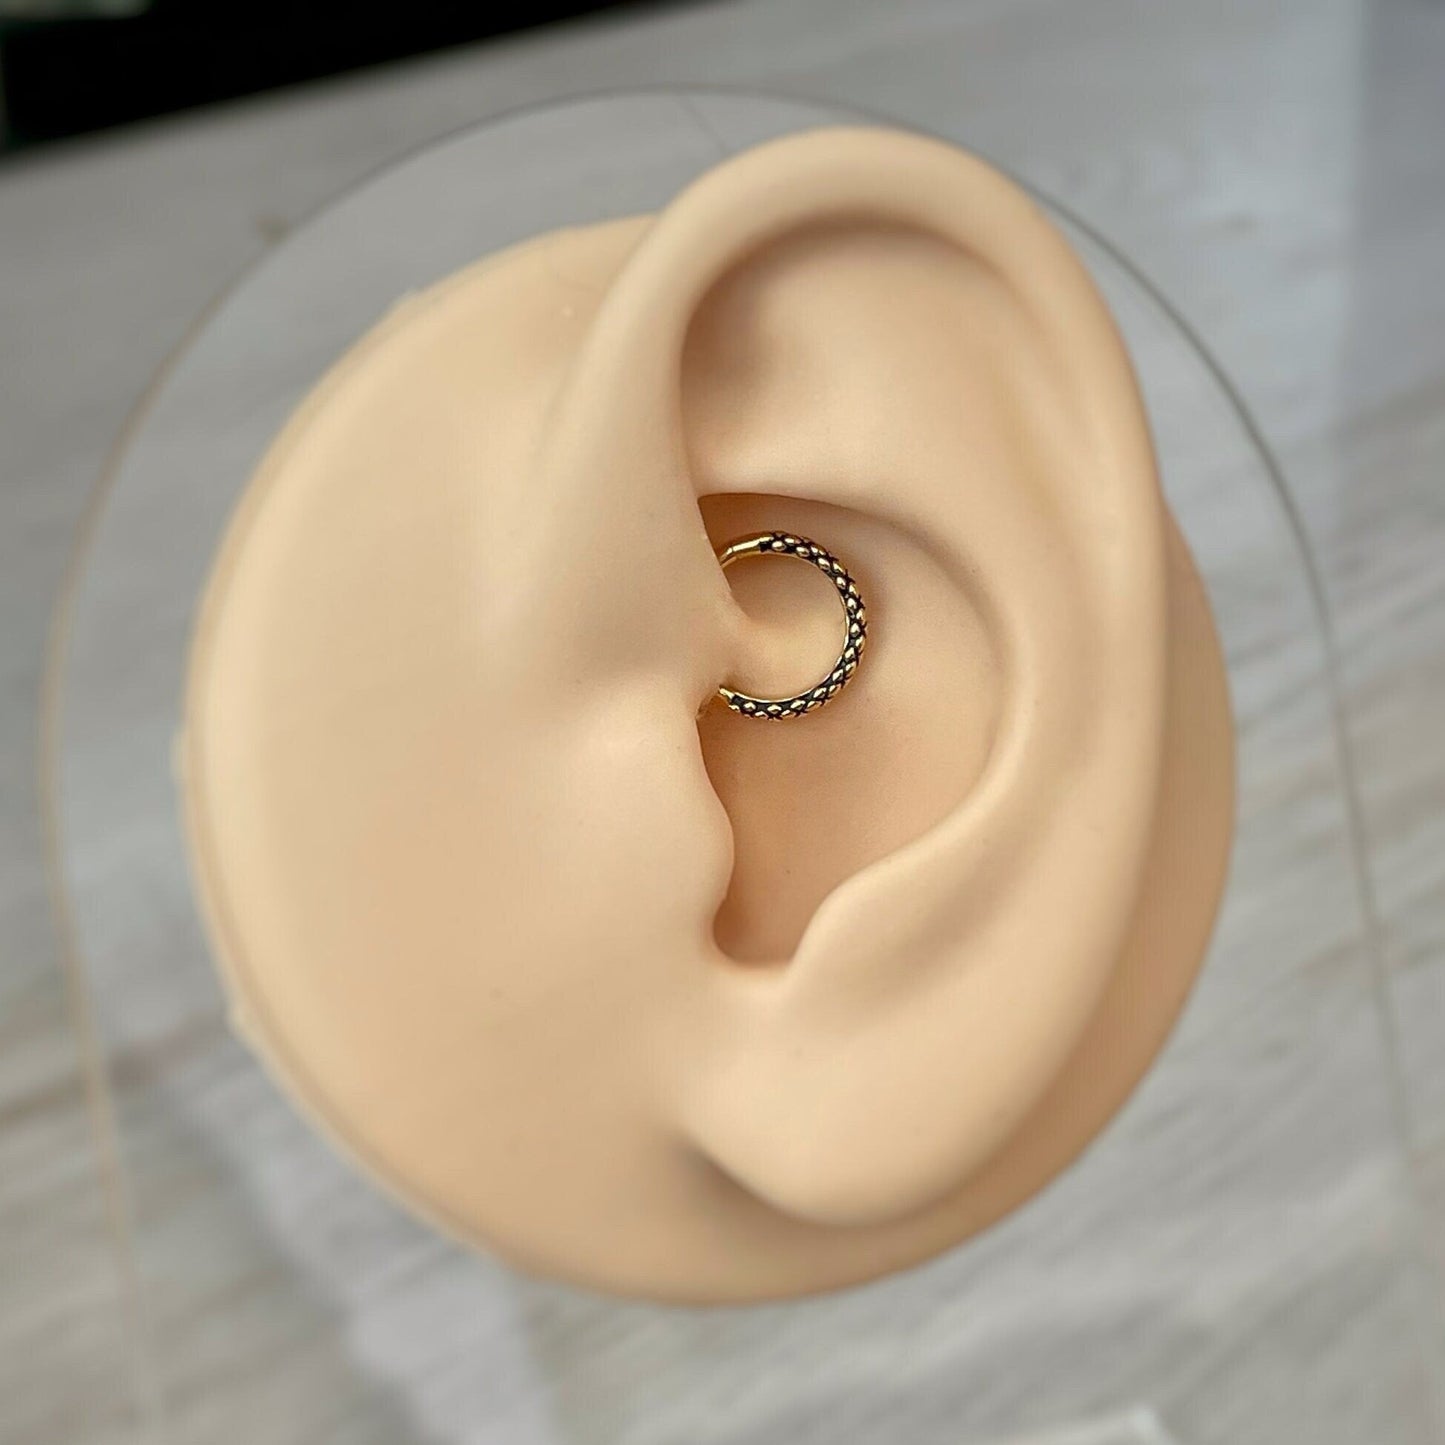 Gold Snake Daith Earring (16G or 18G | 8mm, 10mm, or 12mm | Surgical Steel | Gold or Silver)